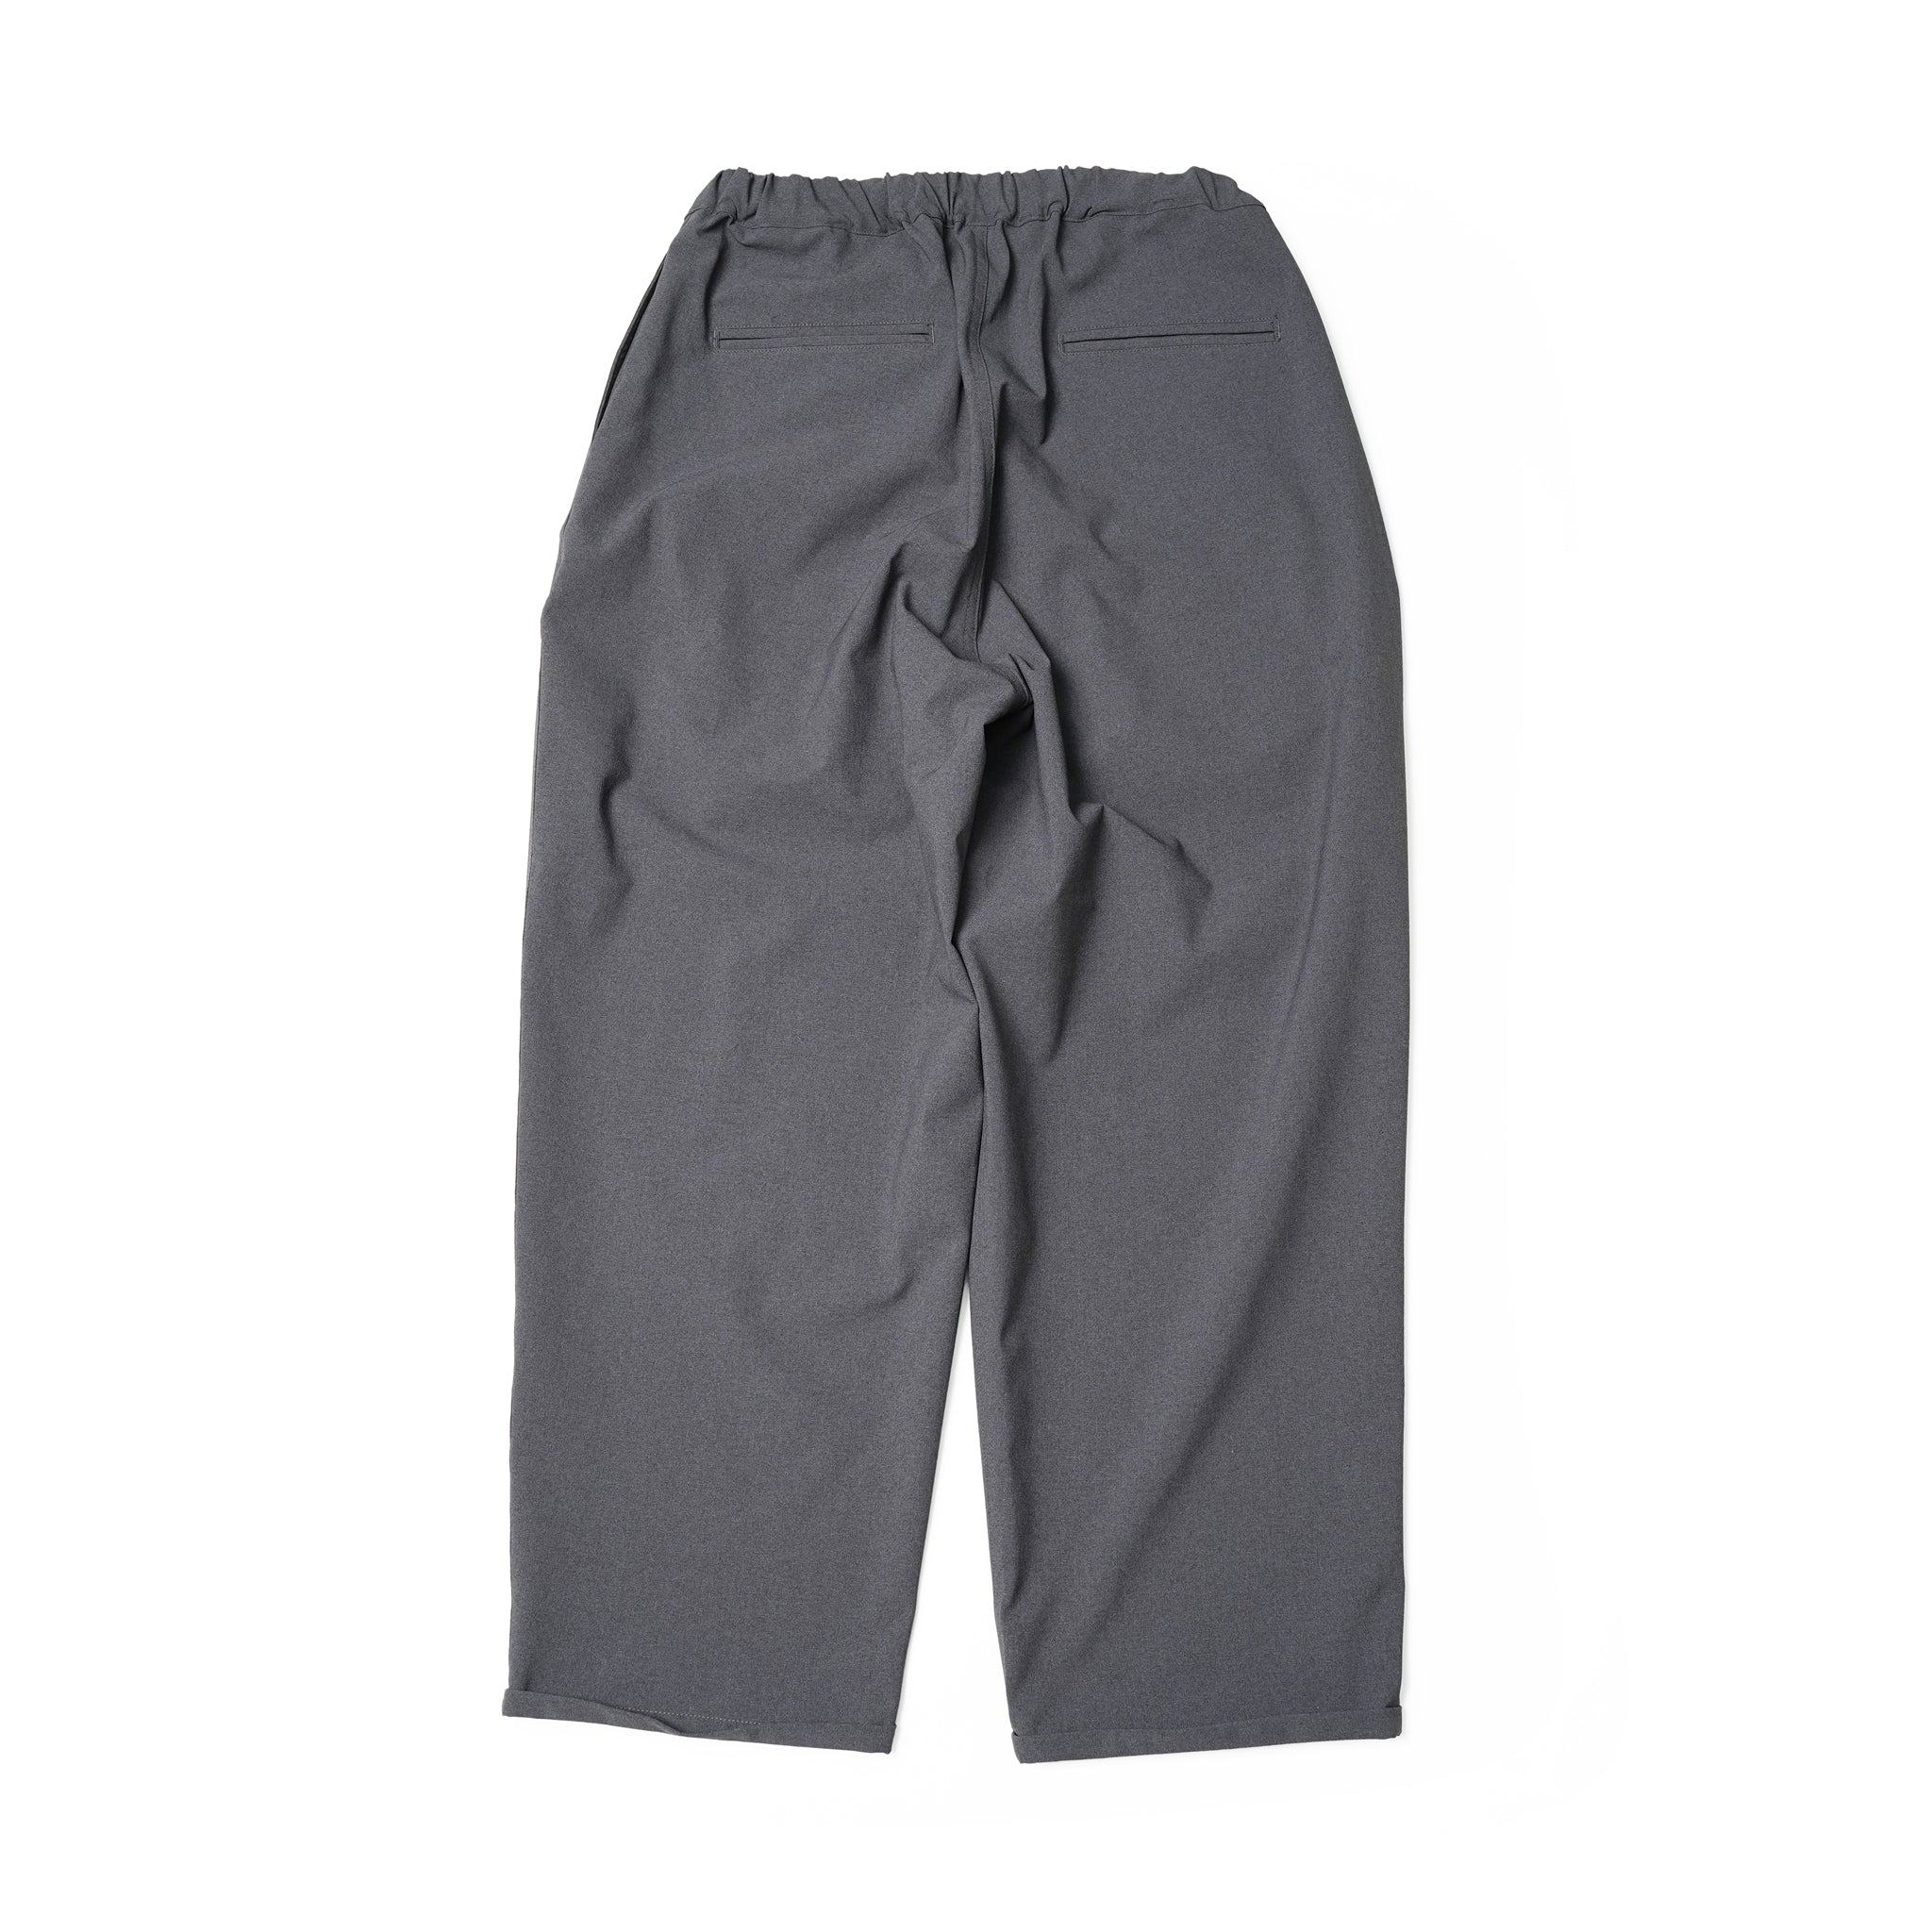 No:PH24FW-001_Charcol | Name:P.H. M.EASY PANTS | Color:Charcol【POWDERHORN MOUNTAINEERING_パウダーホーンマウンテニアリング】【入荷予定アイテム・入荷連絡可能】